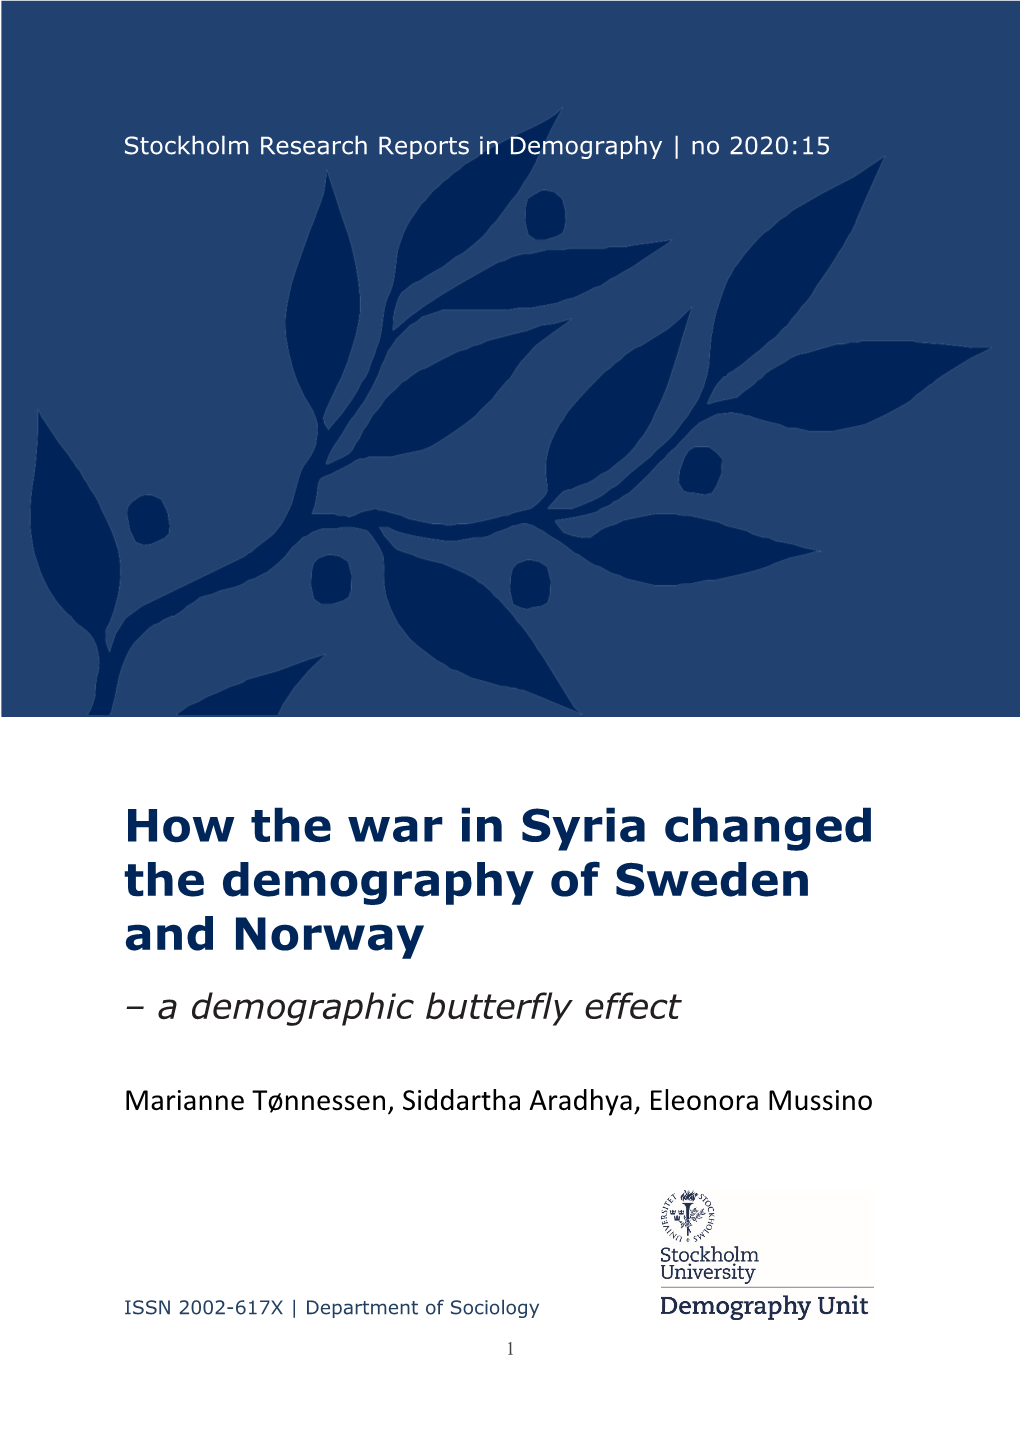 How the War in Syria Changed the Demography of Sweden and Norway